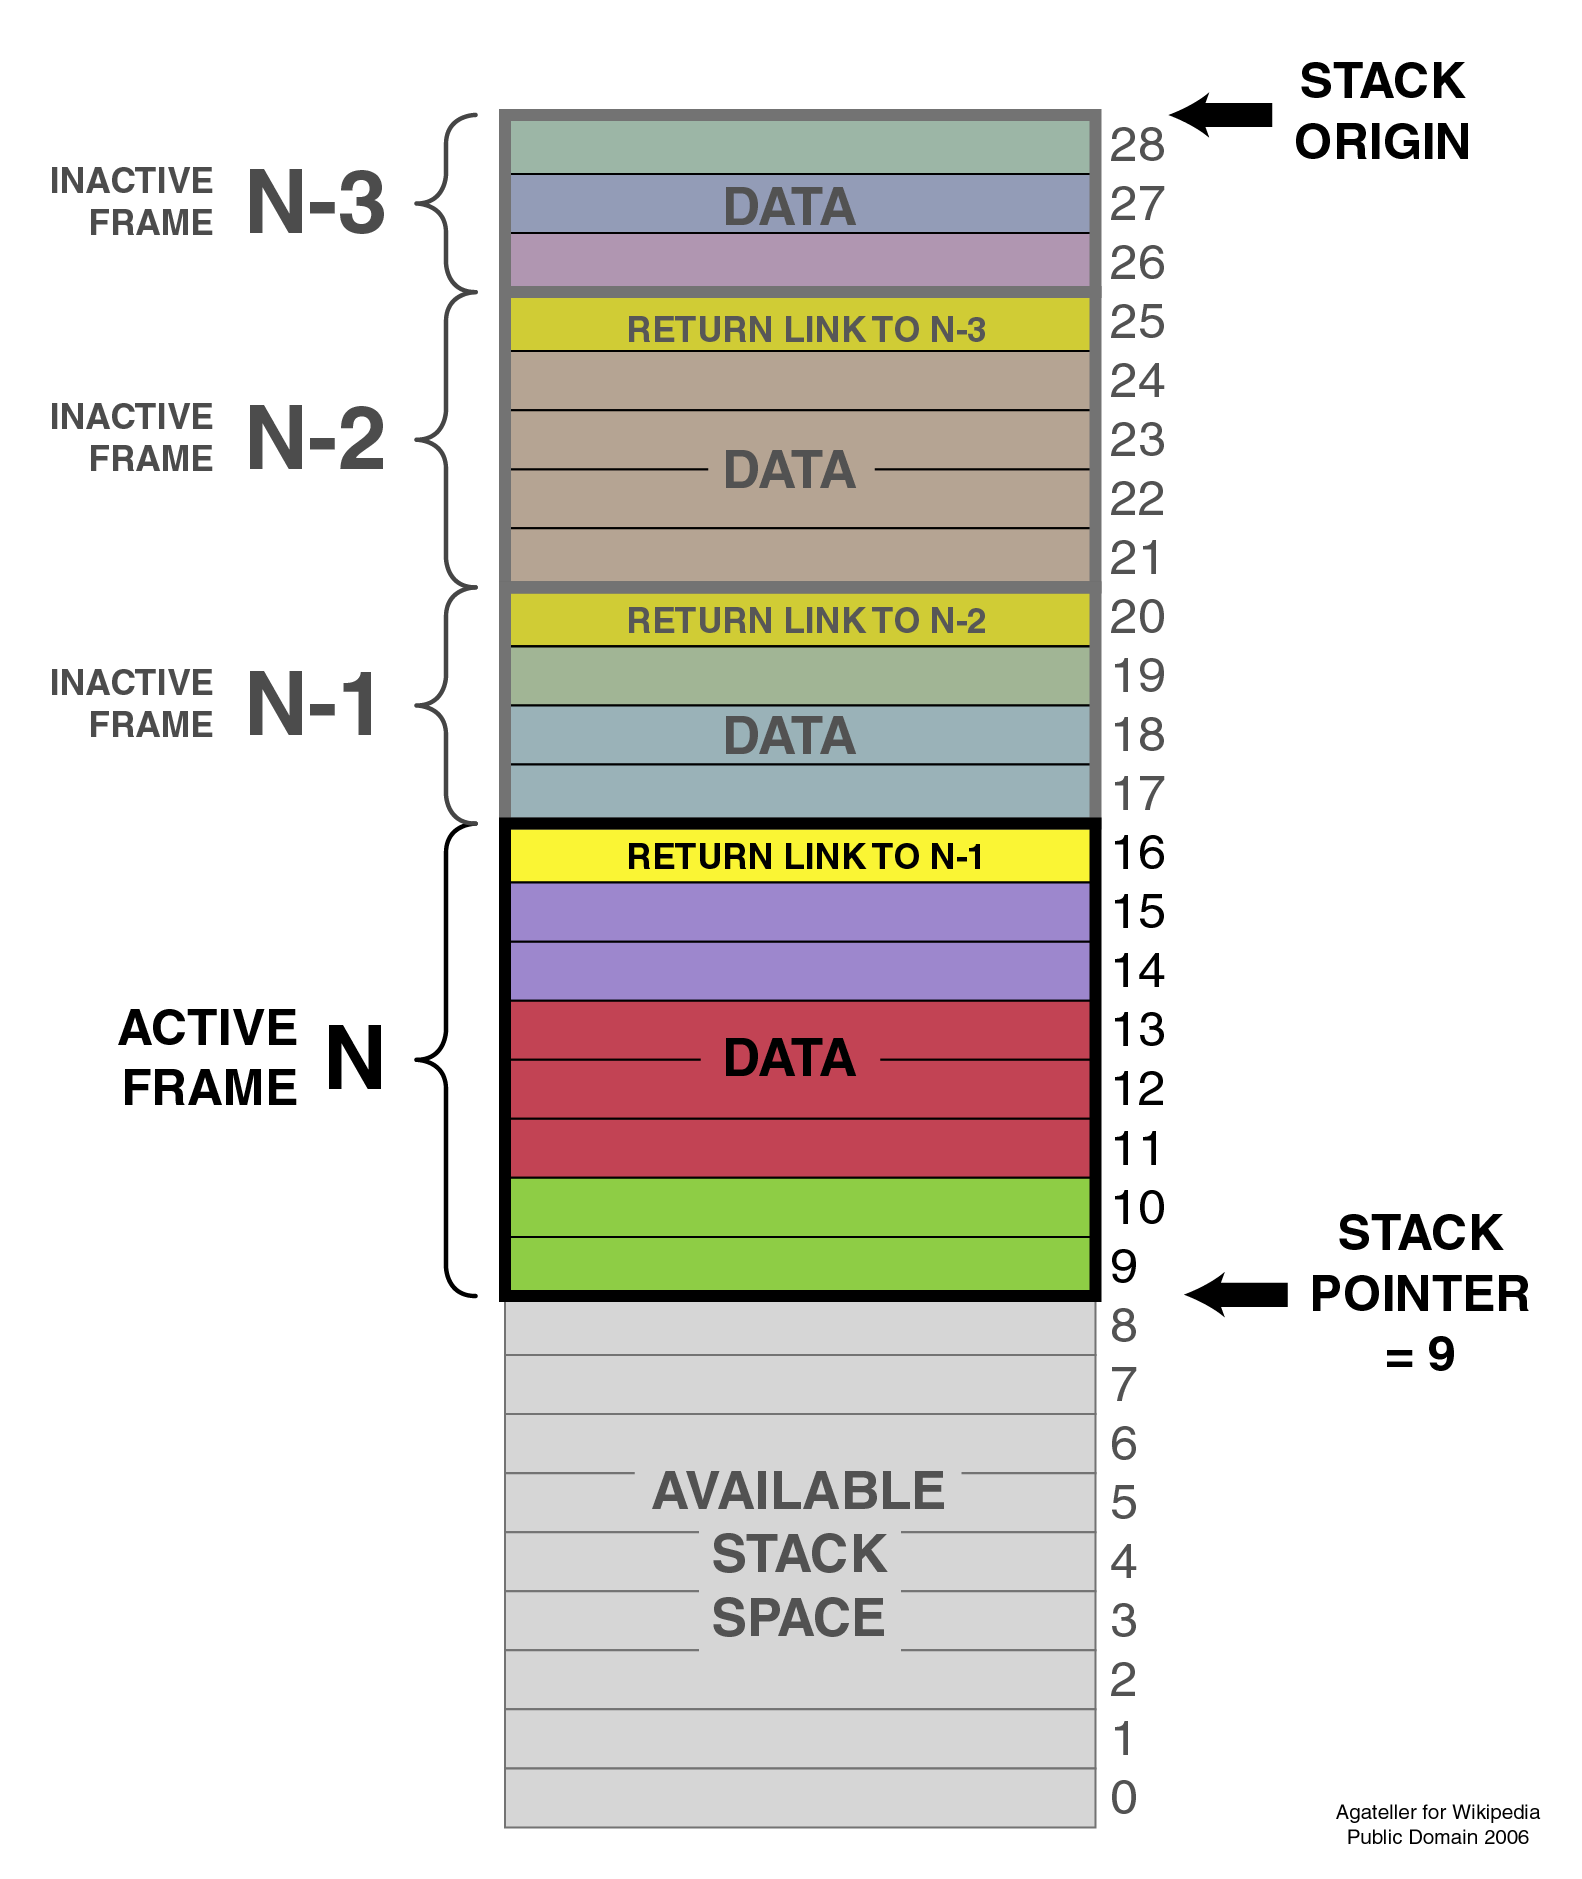 A graphic of the stack in memory